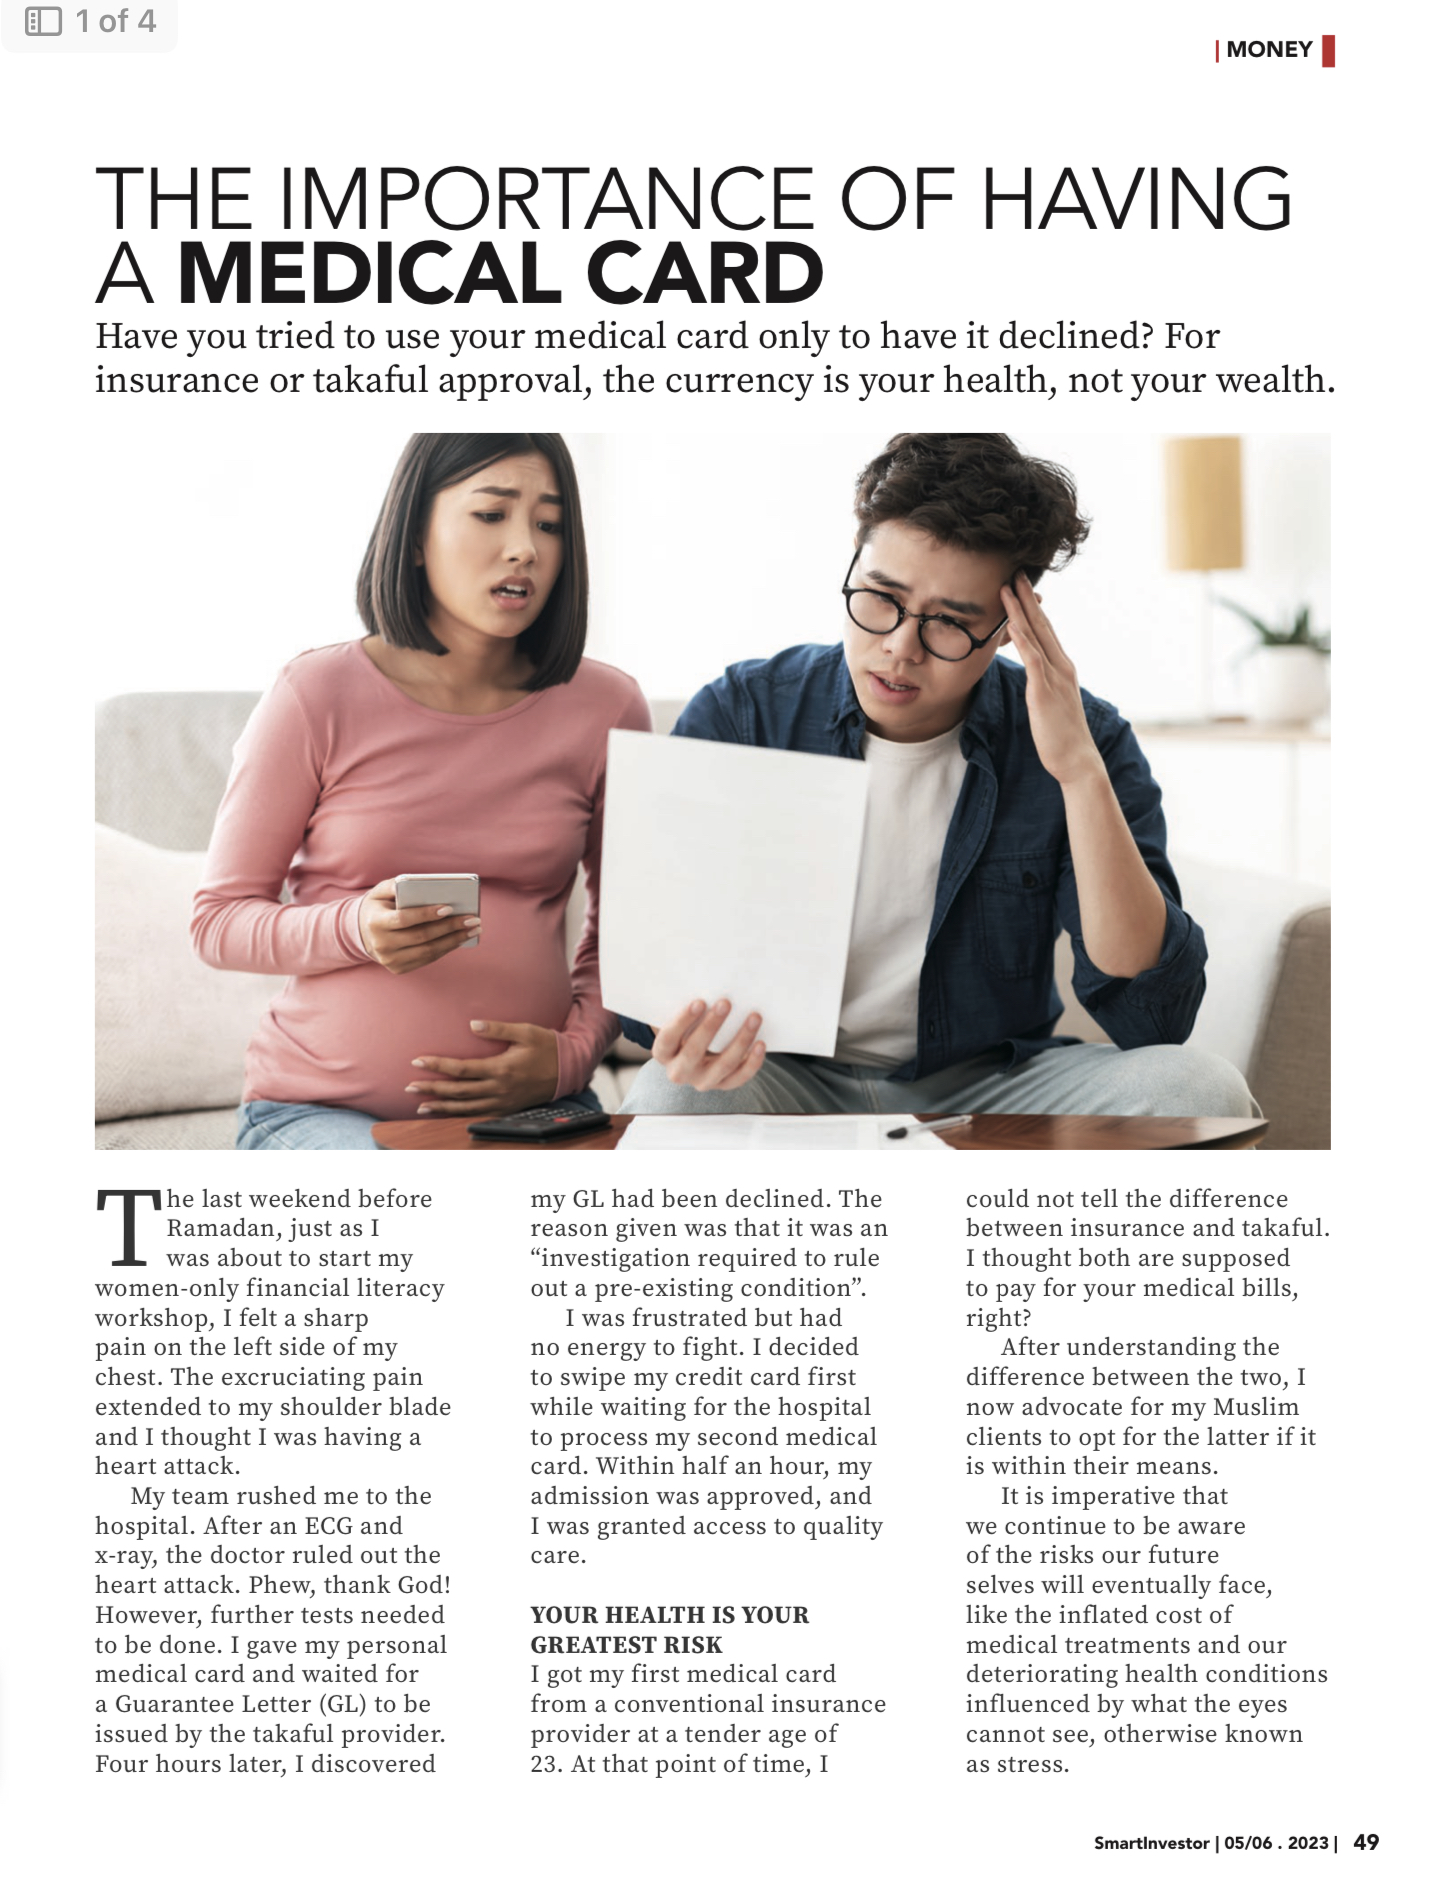 The importance of having a medical card